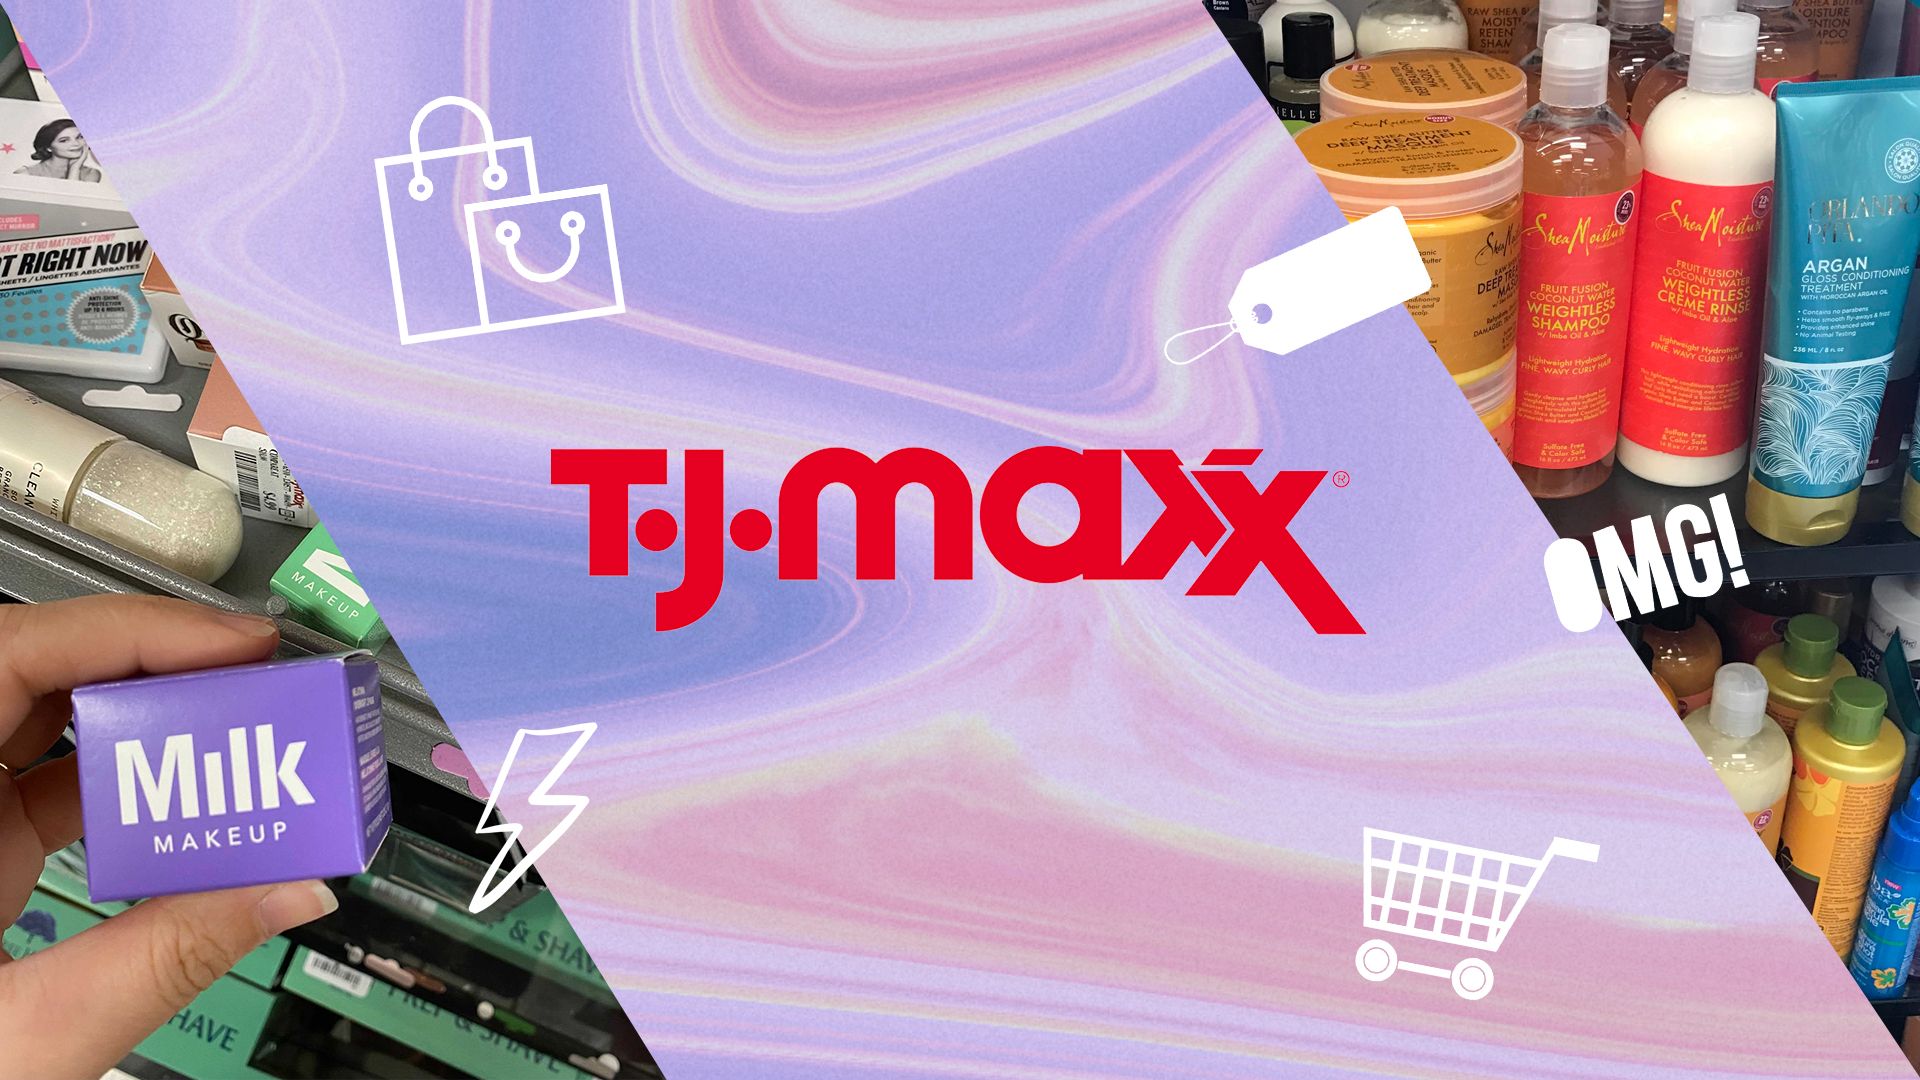 TJ MAXX SELLS DESIGNER?  HOW DO THEY GET THESES ITEMS? 